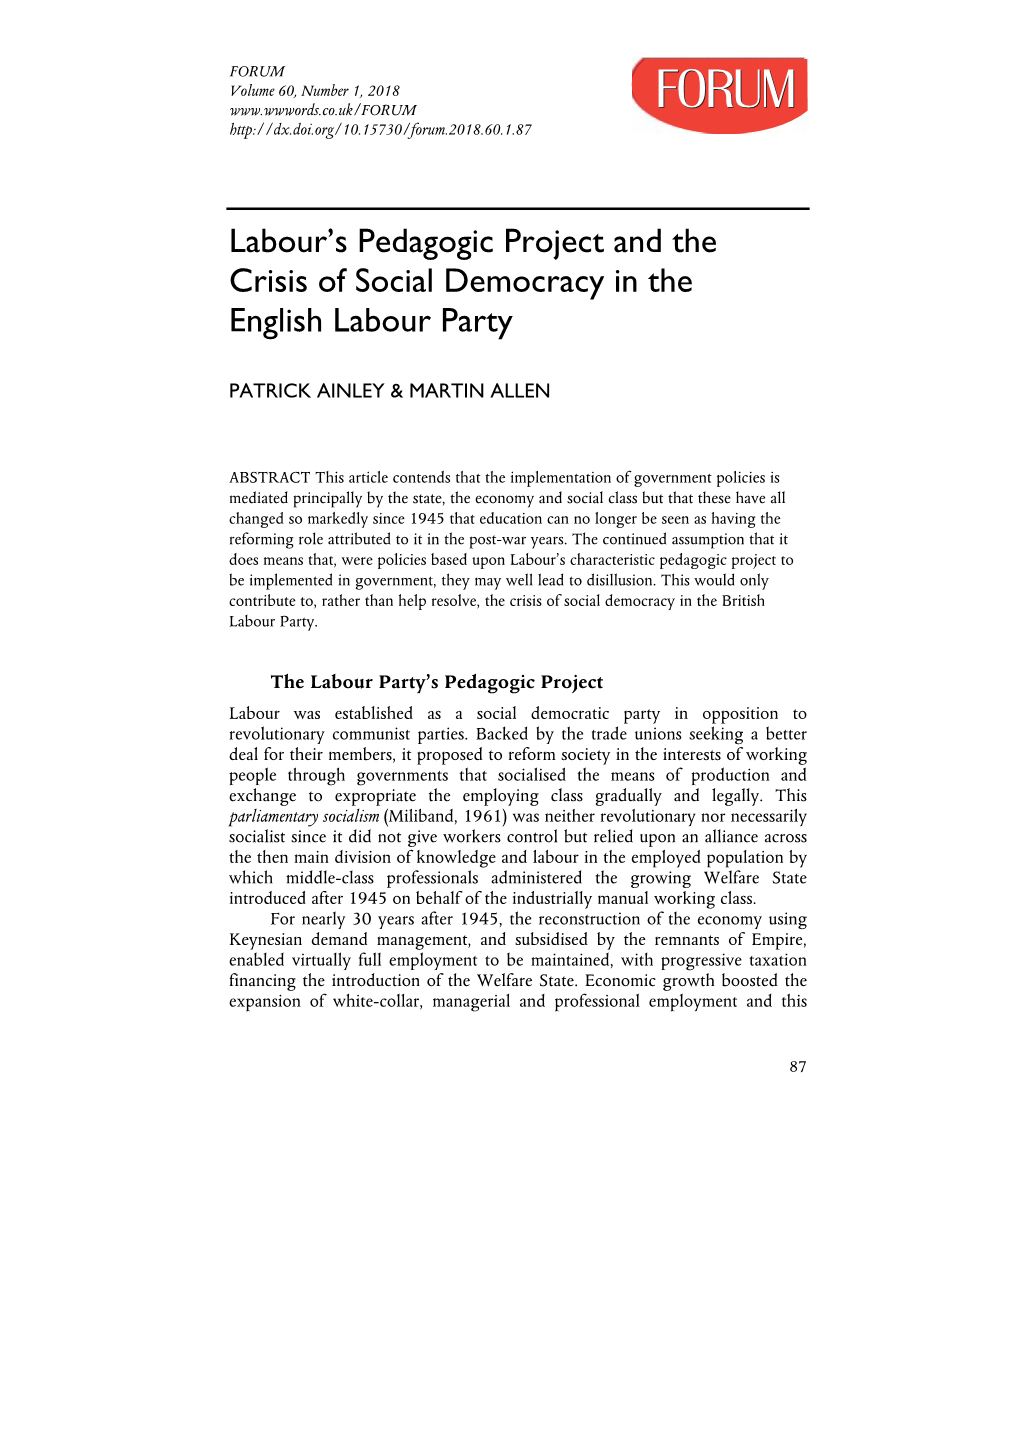 Labour's Pedagogic Project and the Crisis of Social Democracy in the English Labour Party